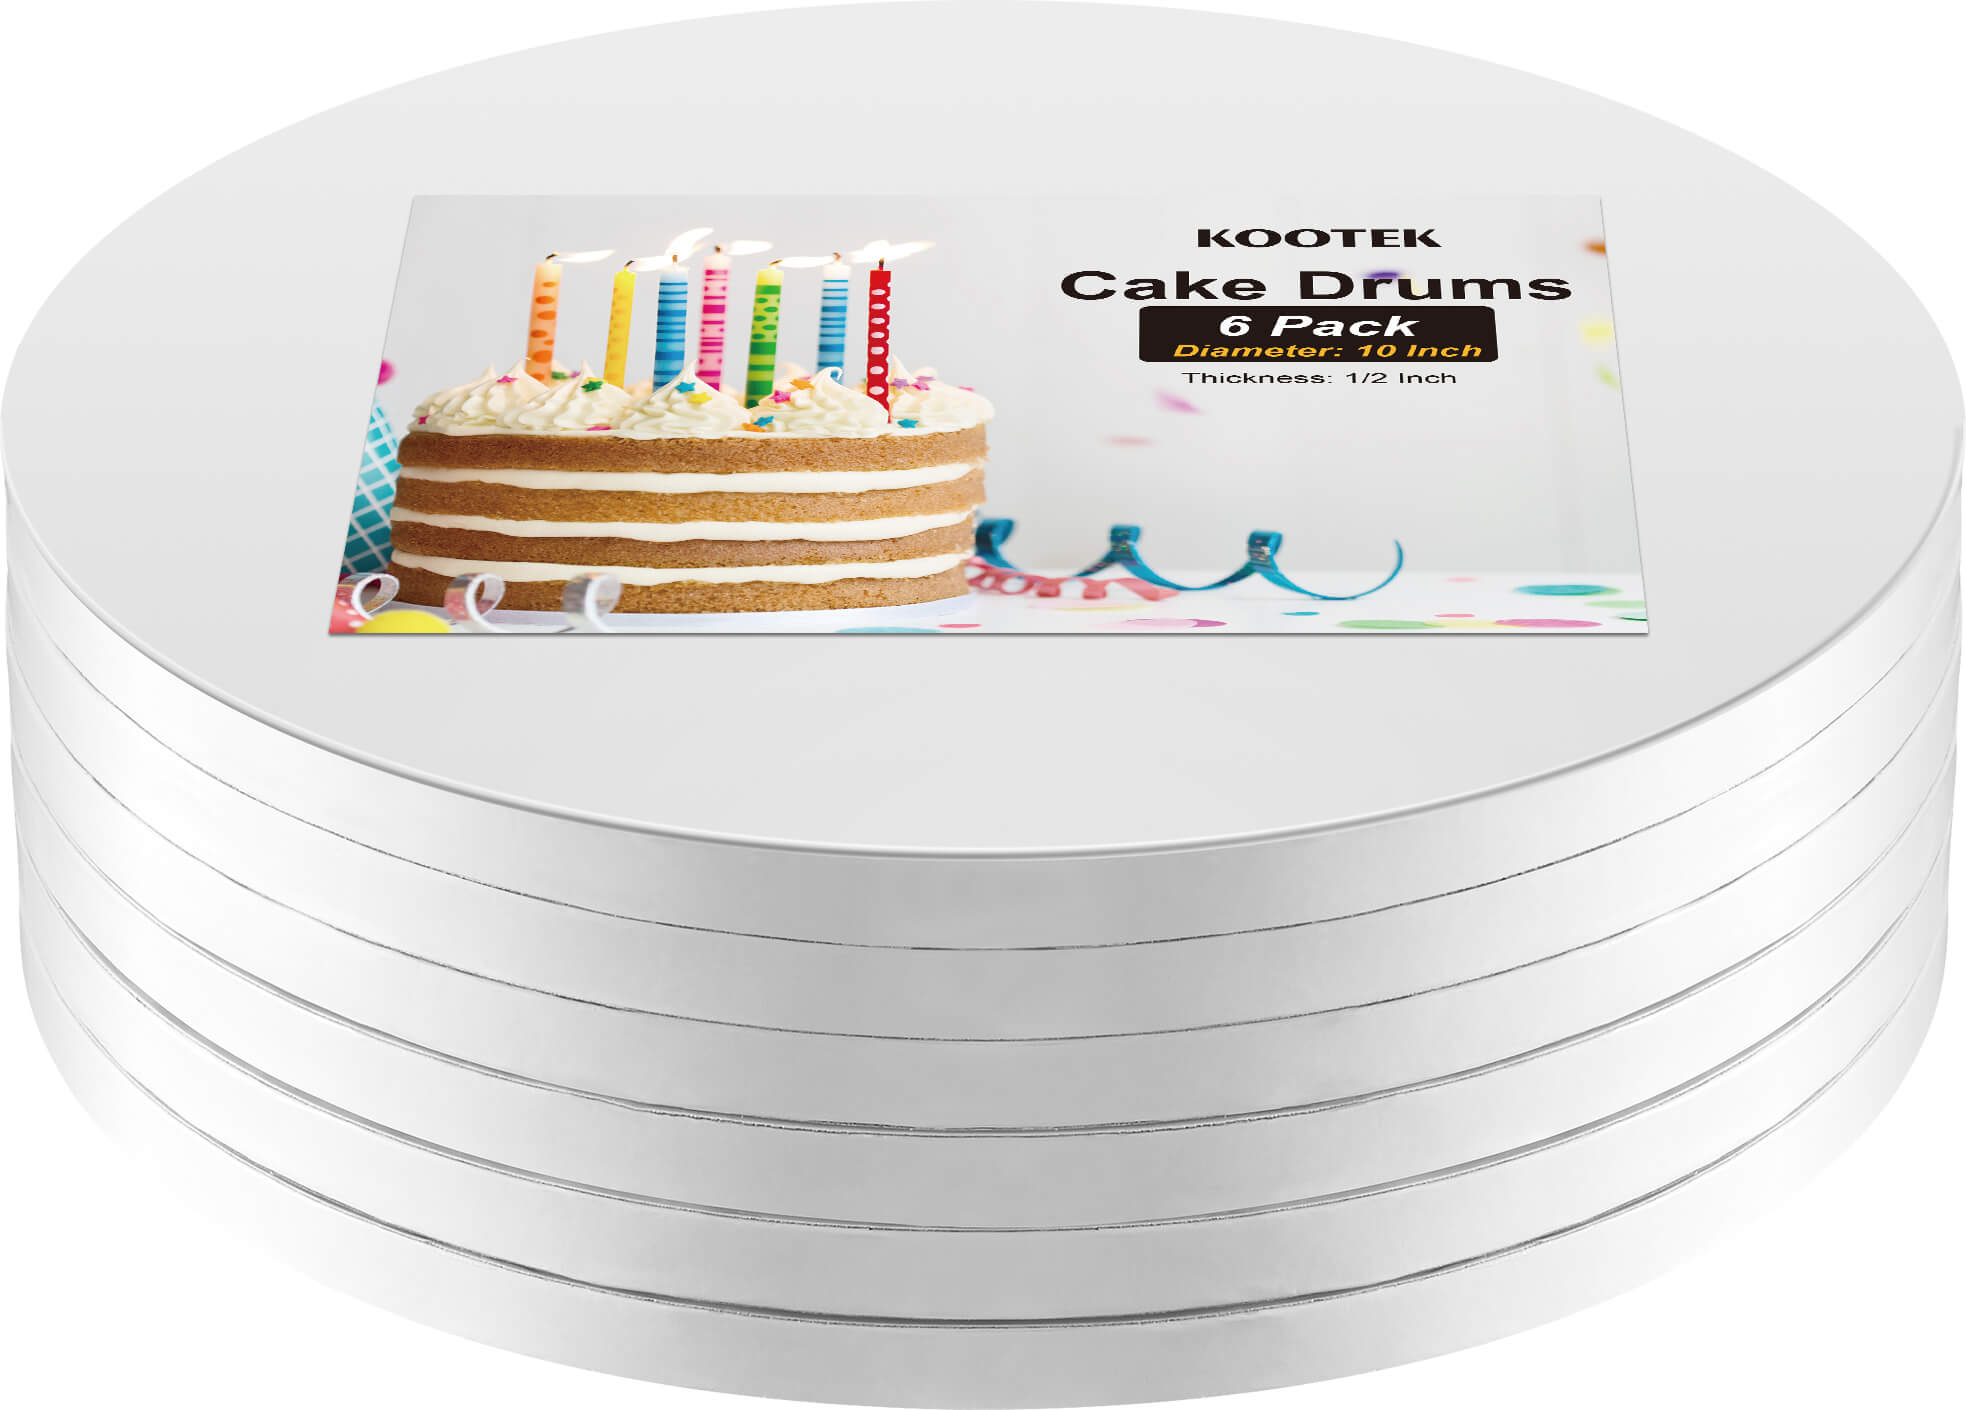 Kootek Cake Boards Drum 10 Inch Round, 1/2" Thick Cake Drums, Cake Decorating Supplies White 6-Pack Sturdy Cake Corrugated Cardboard for Multi-Layer Cakes